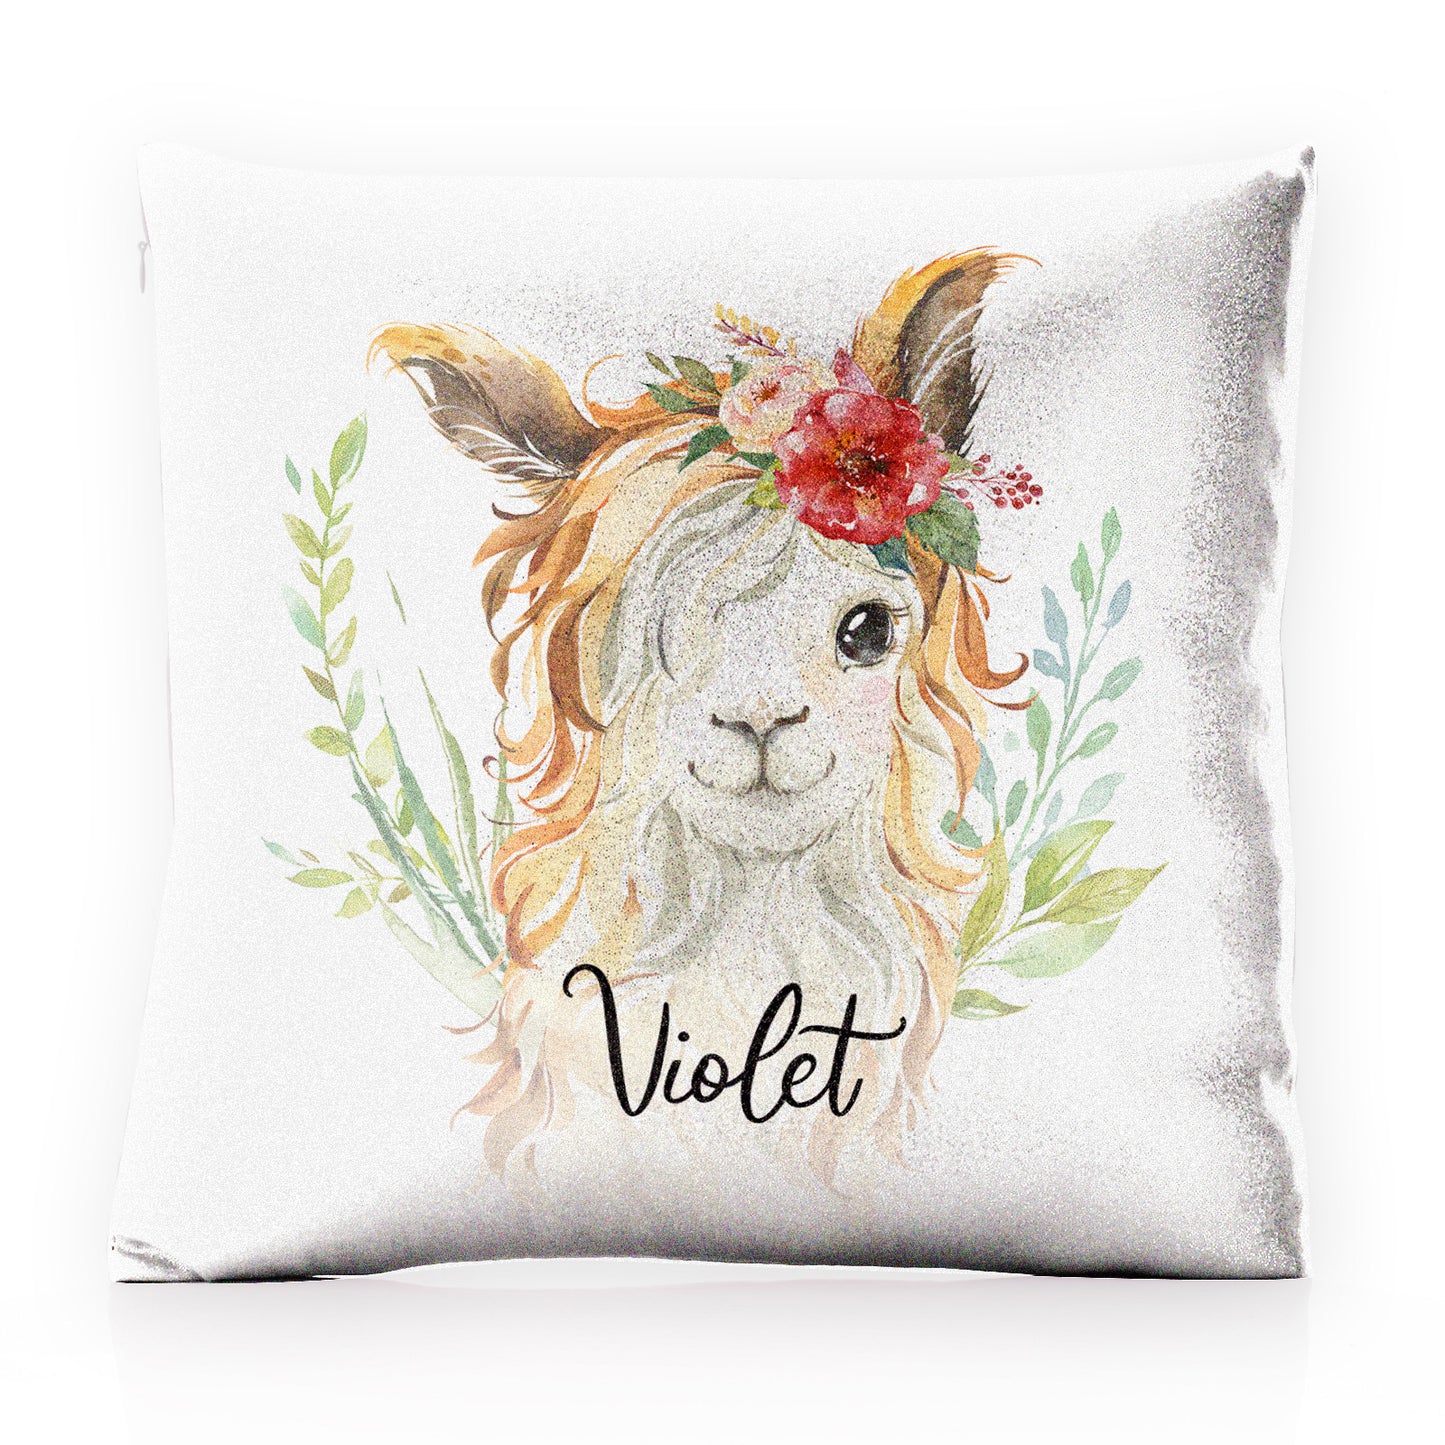 Personalised Glitter Cushion with White Goat with Red Flower Hair and Cute Text